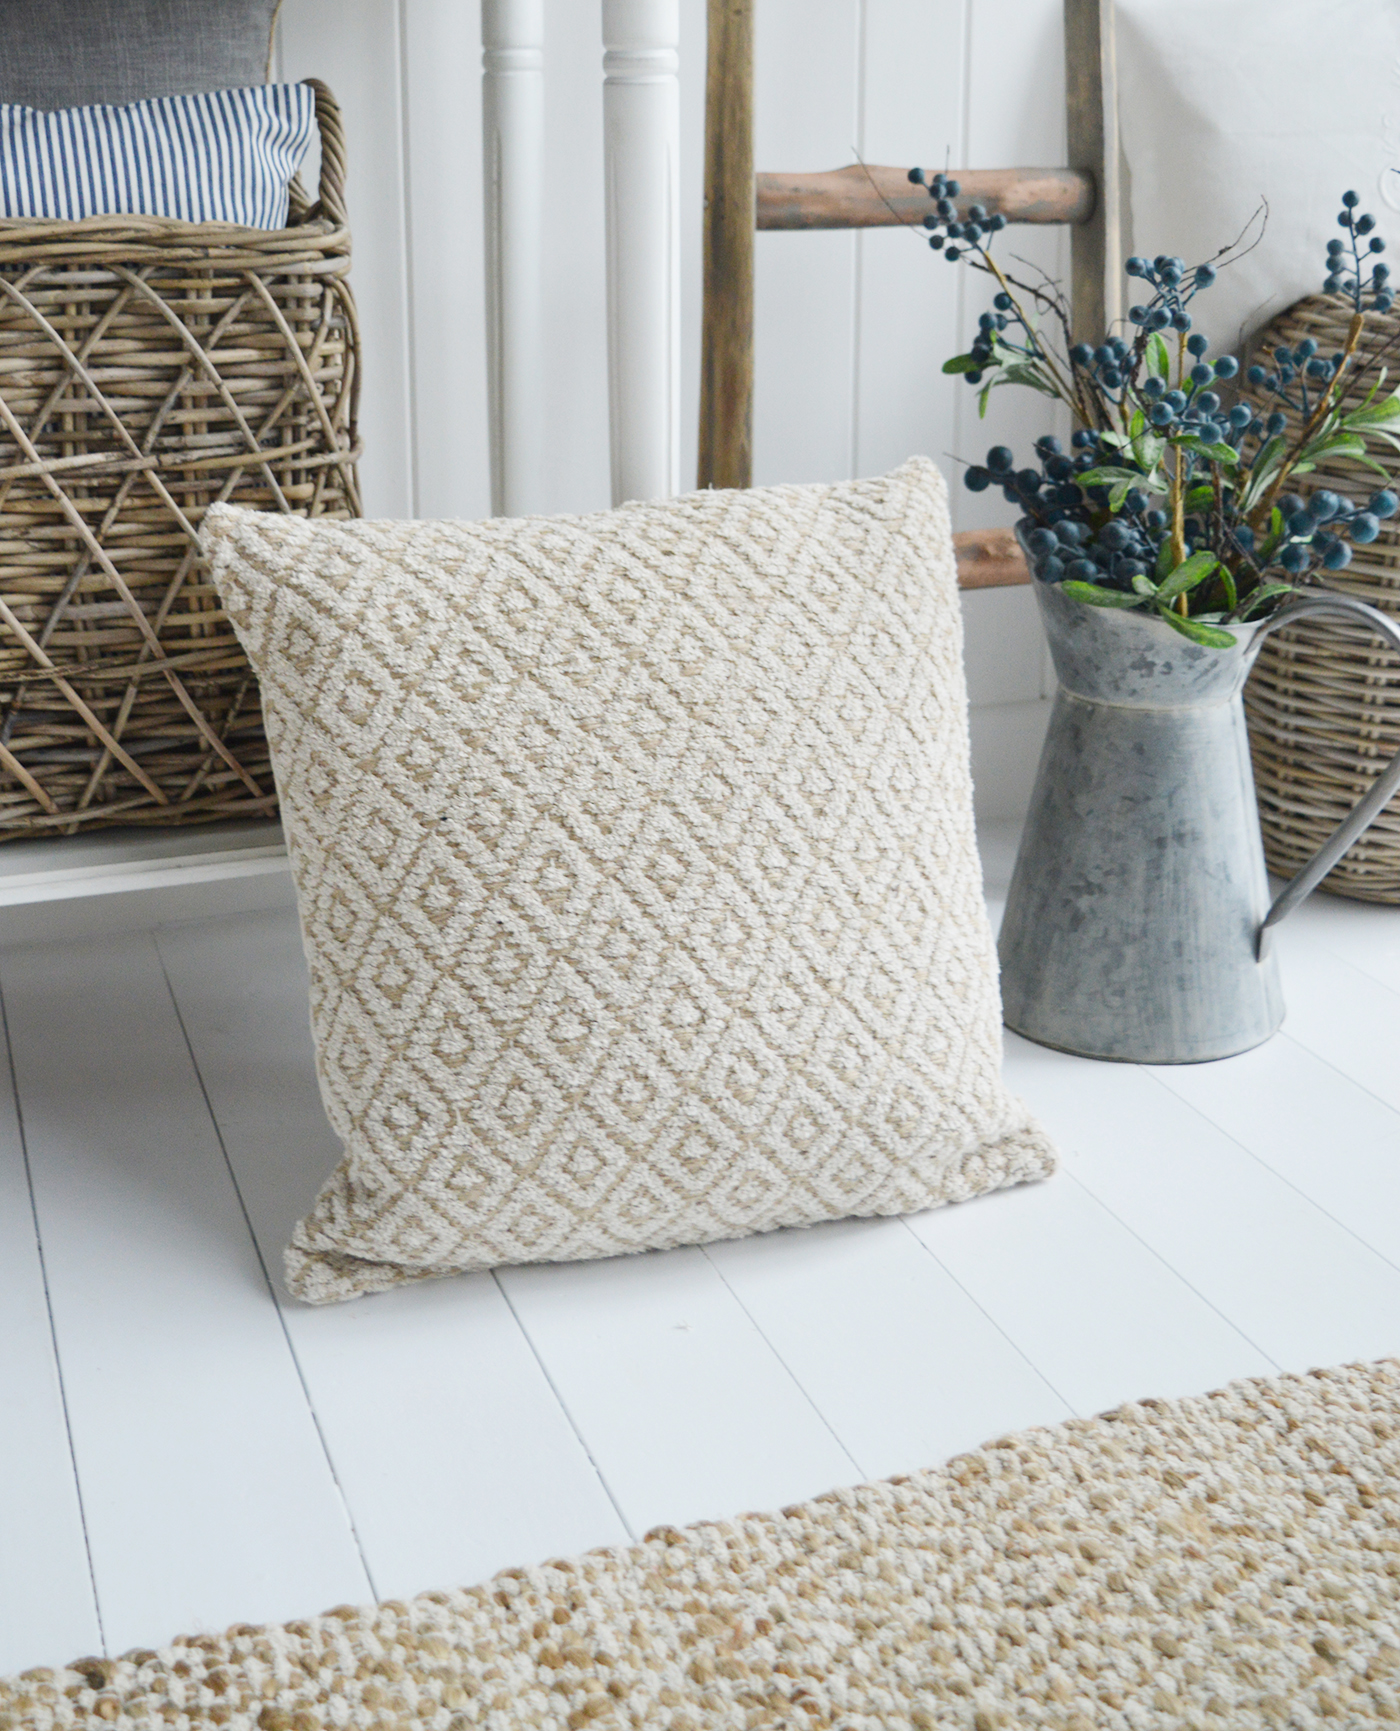 Jute Cushion - Just perfect for our New England styled interiors for coastal, city and country homes in a simple but gorgeous style